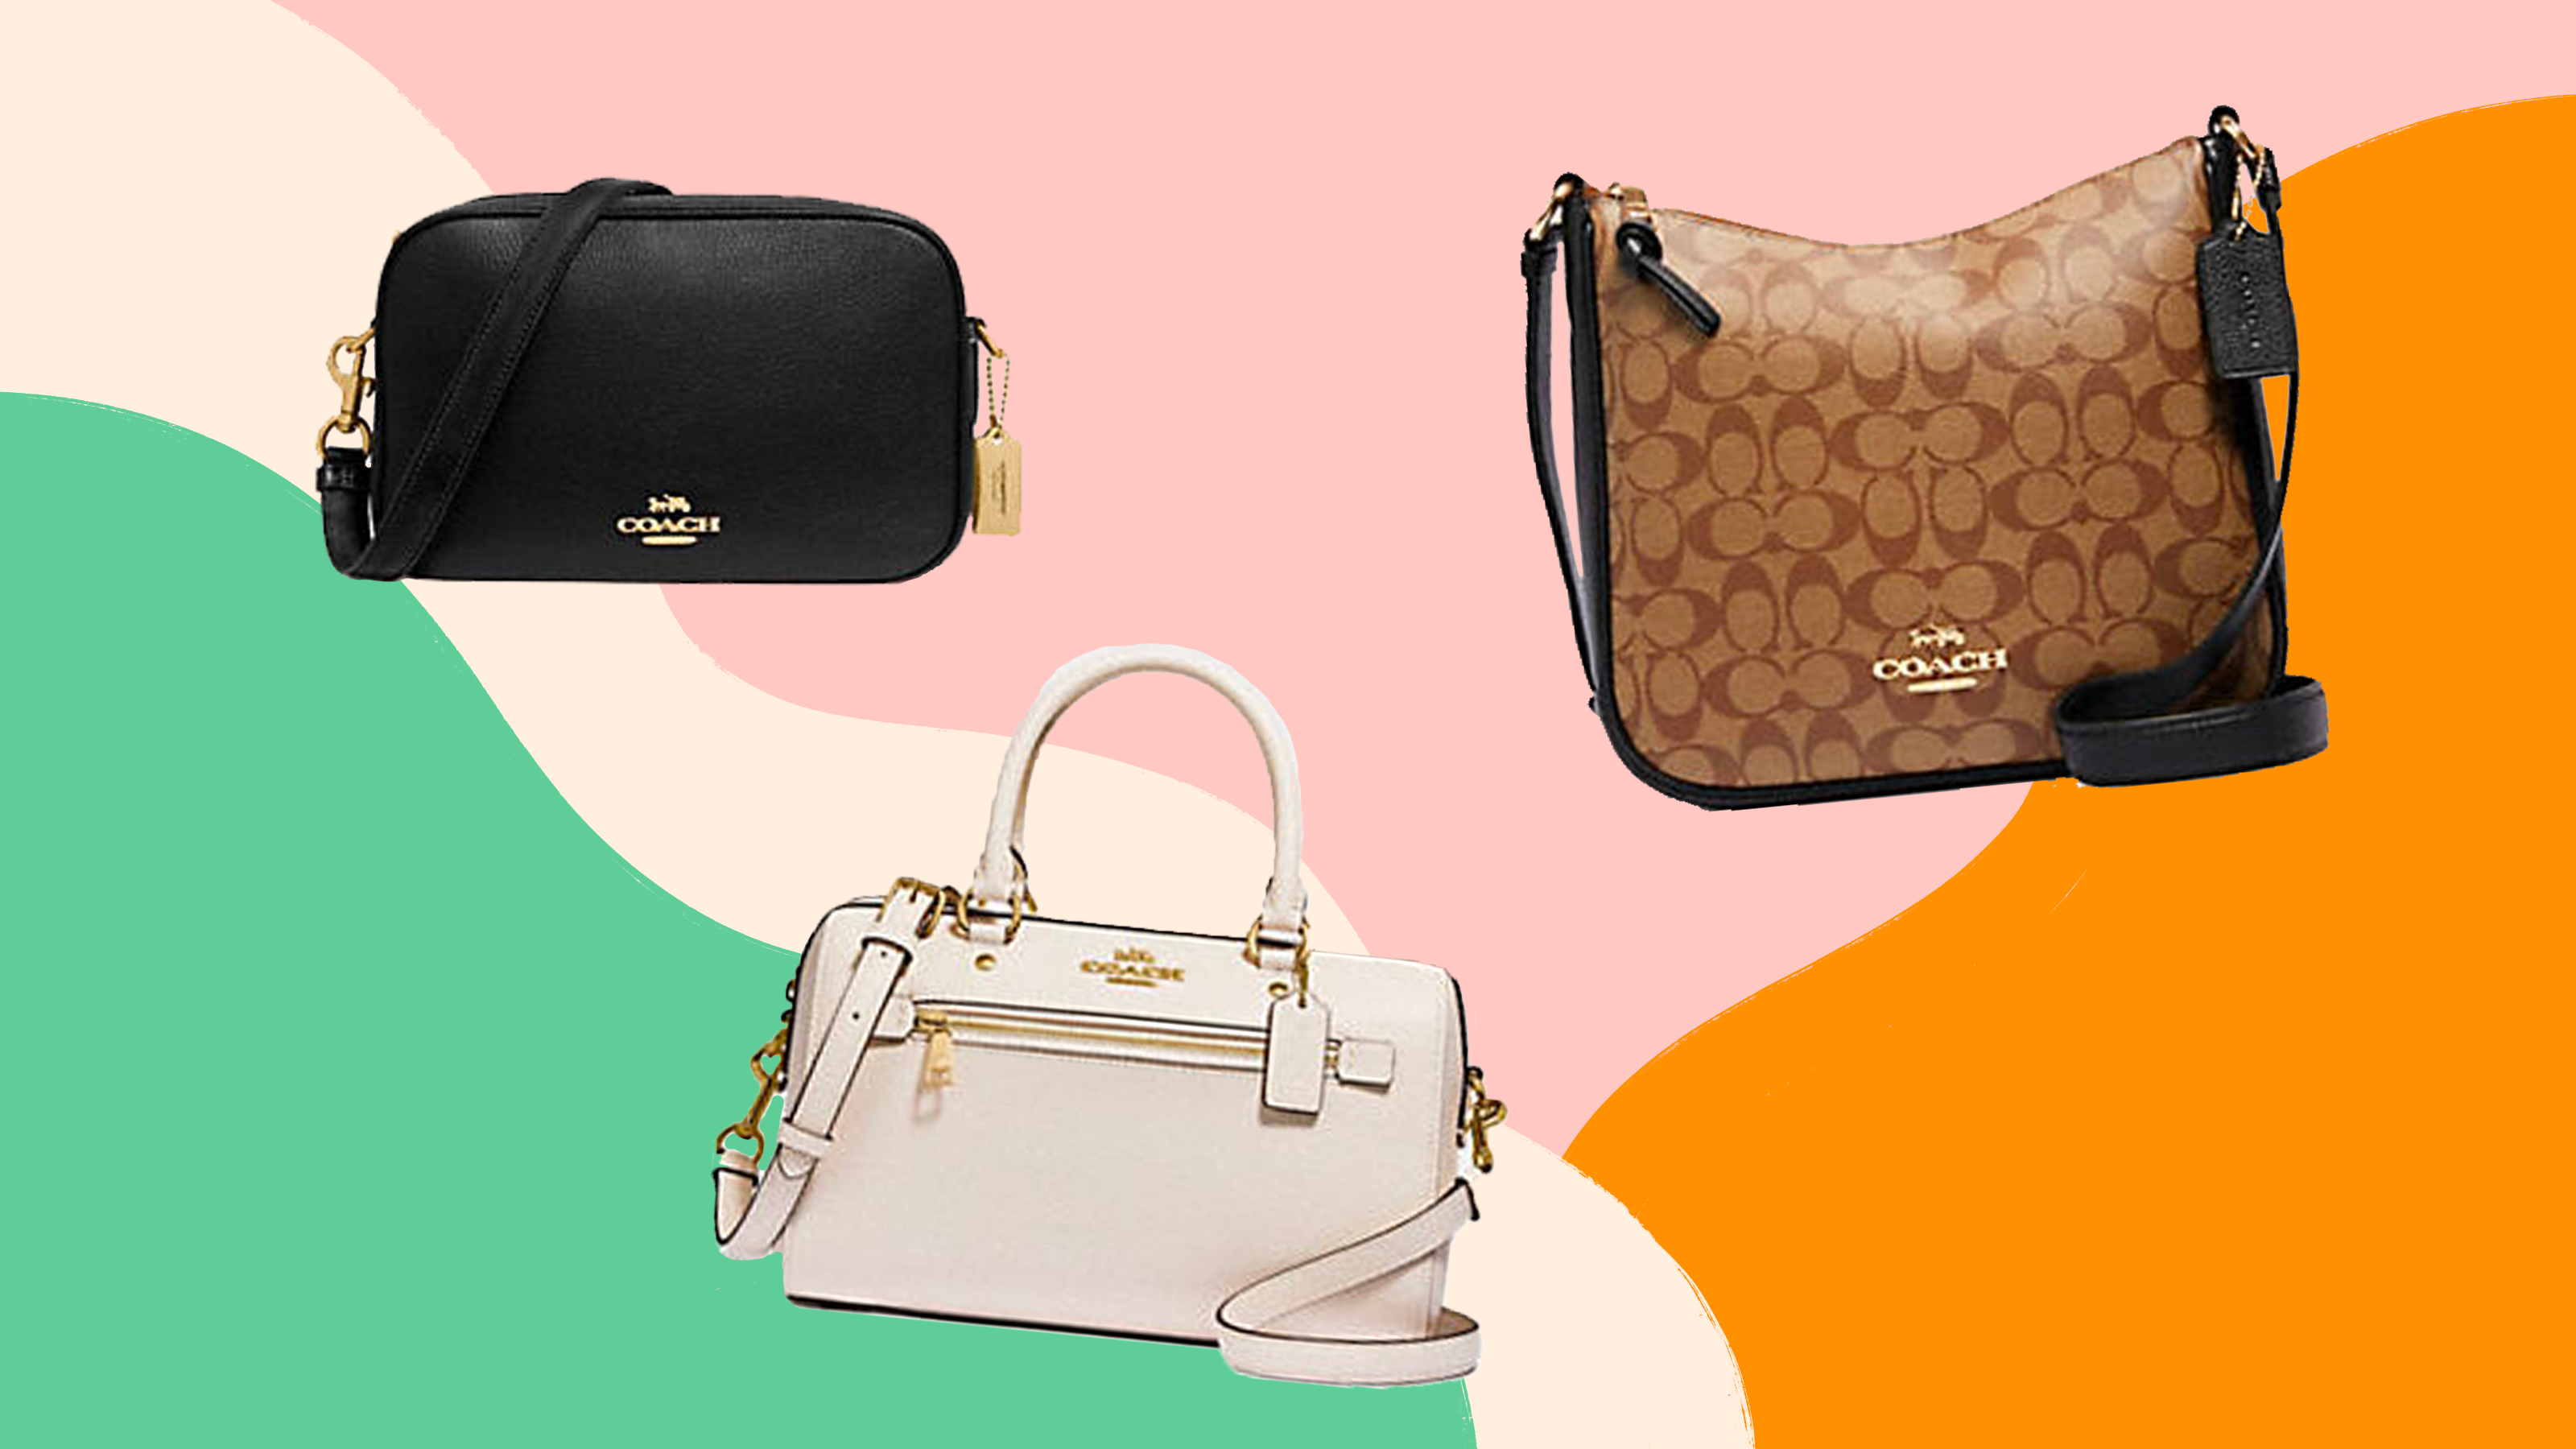 Coach Outlet: Save on crossbodies, handbags, totes and more